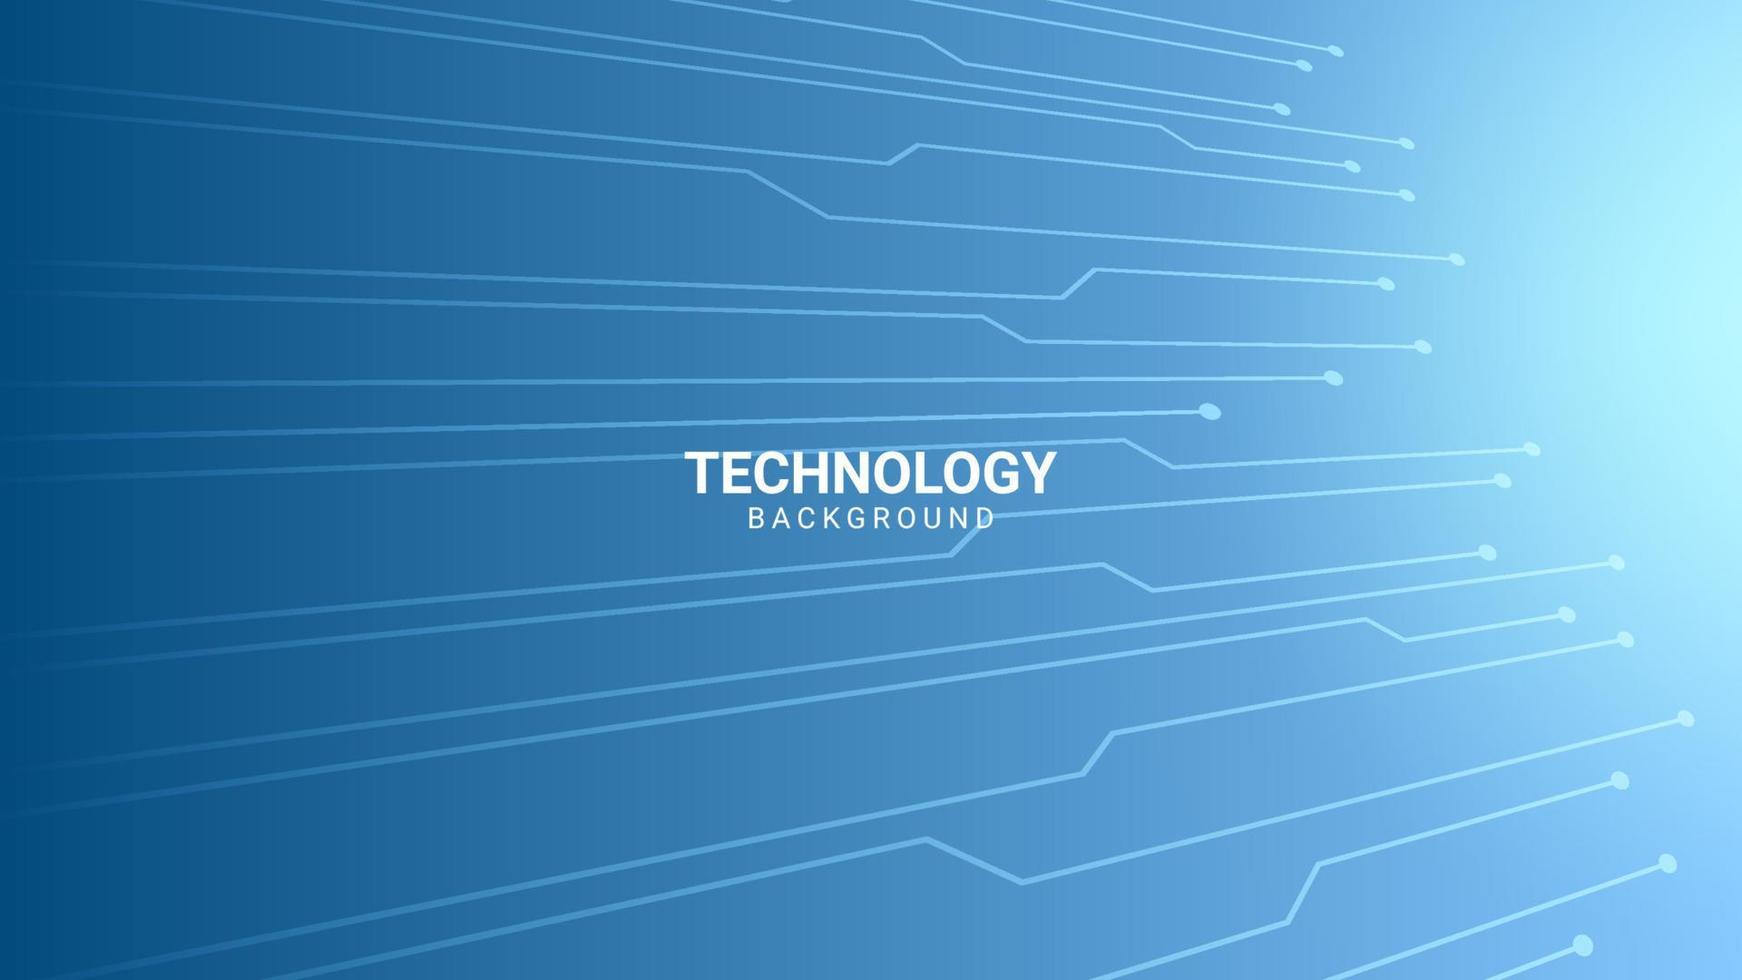 technology background with blue lines and dots vector